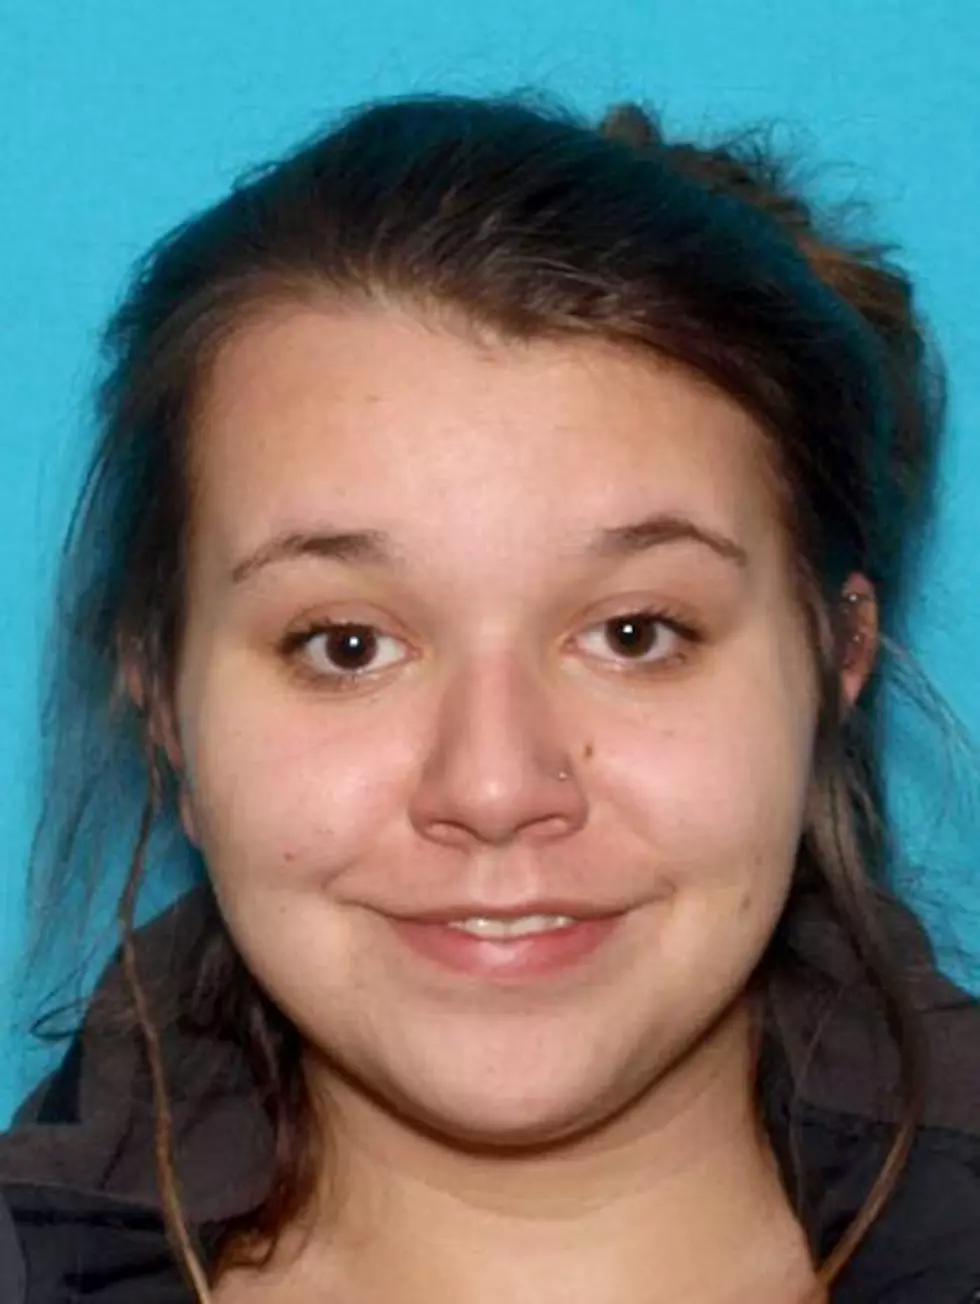 16 Year Old Missing Girl May Be in Ellsworth [UPDATE]